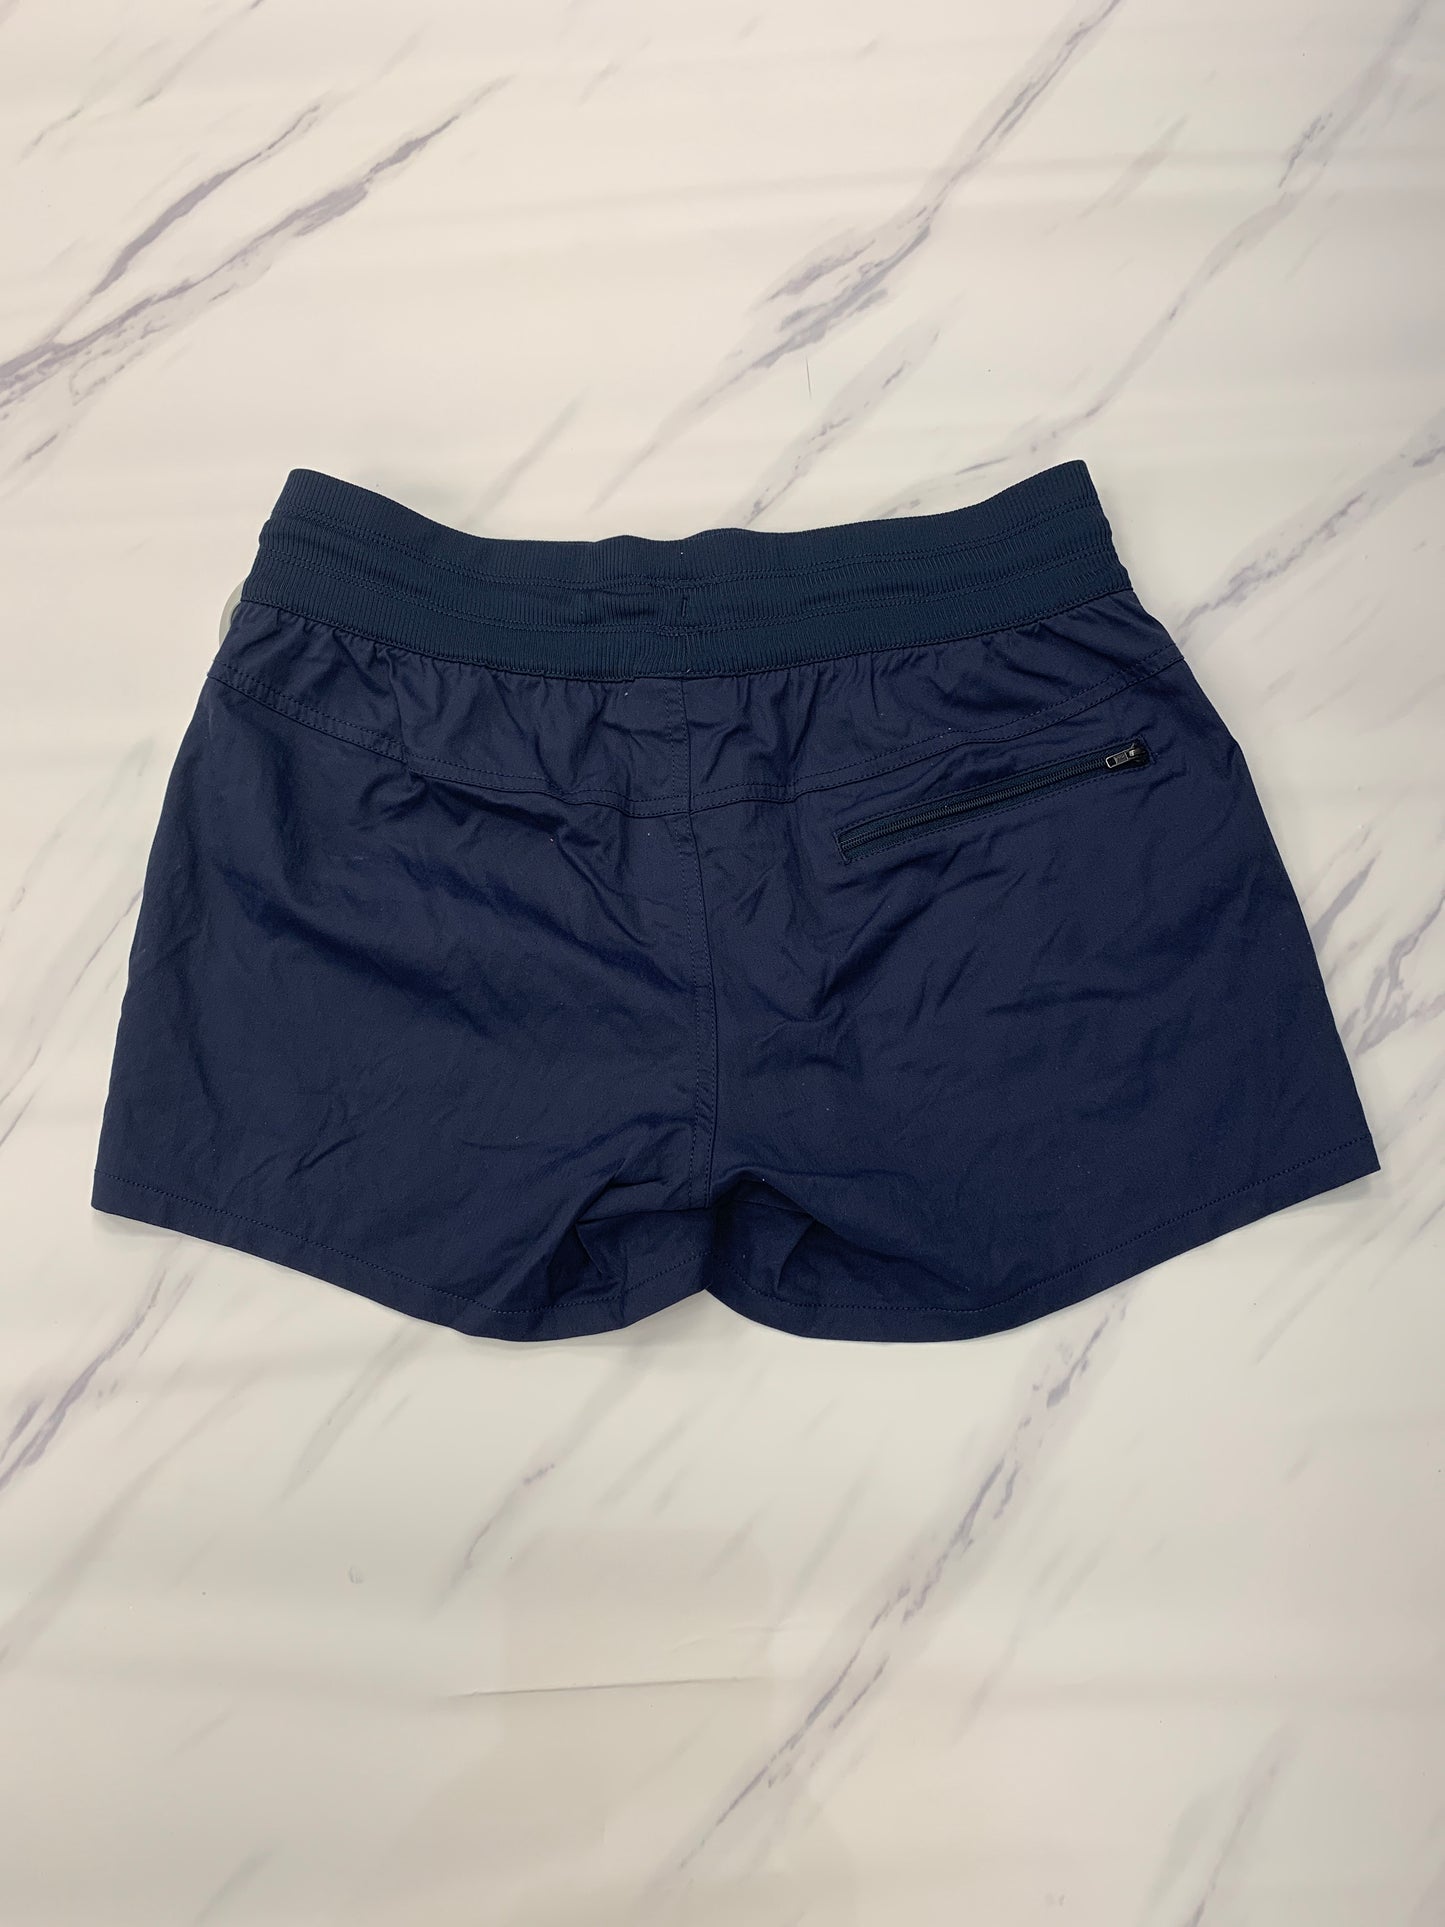 Athletic Shorts By The North Face  Size: S